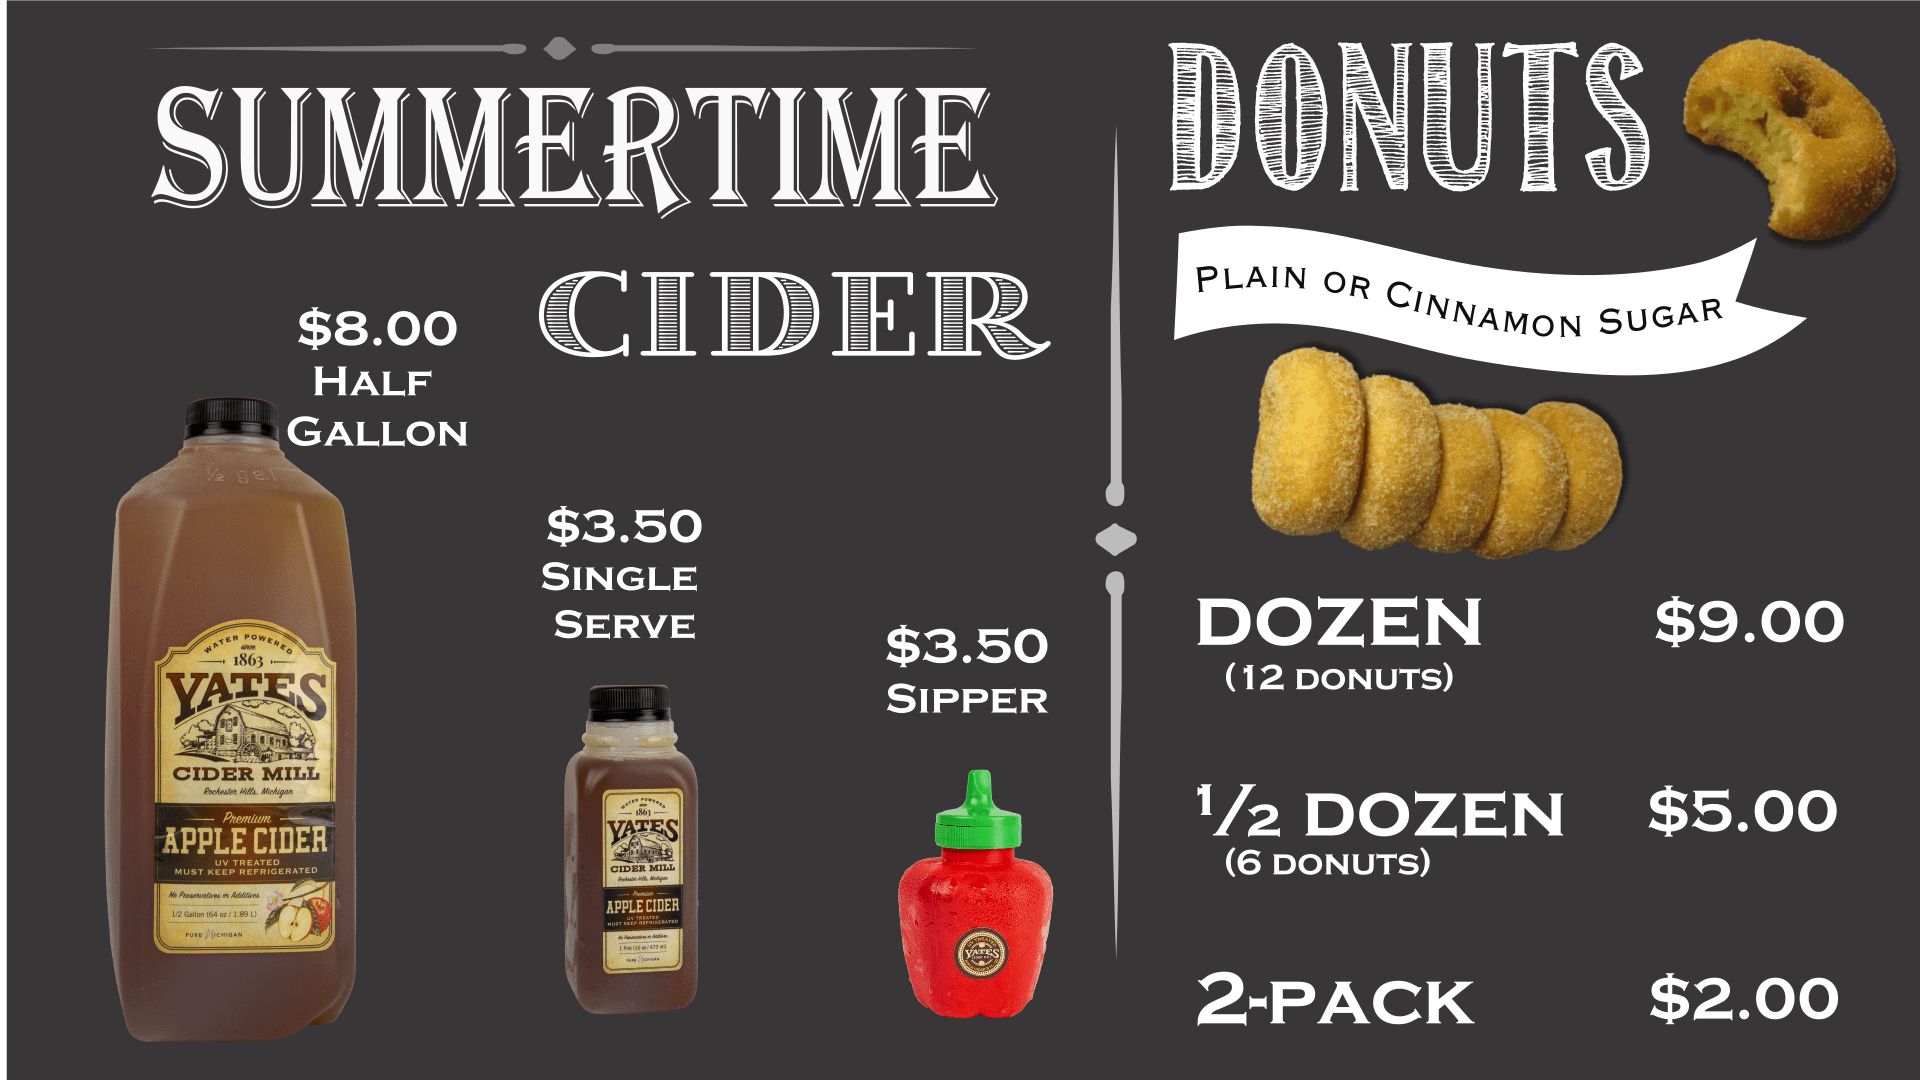 Cider and Donuts Summertime 2022